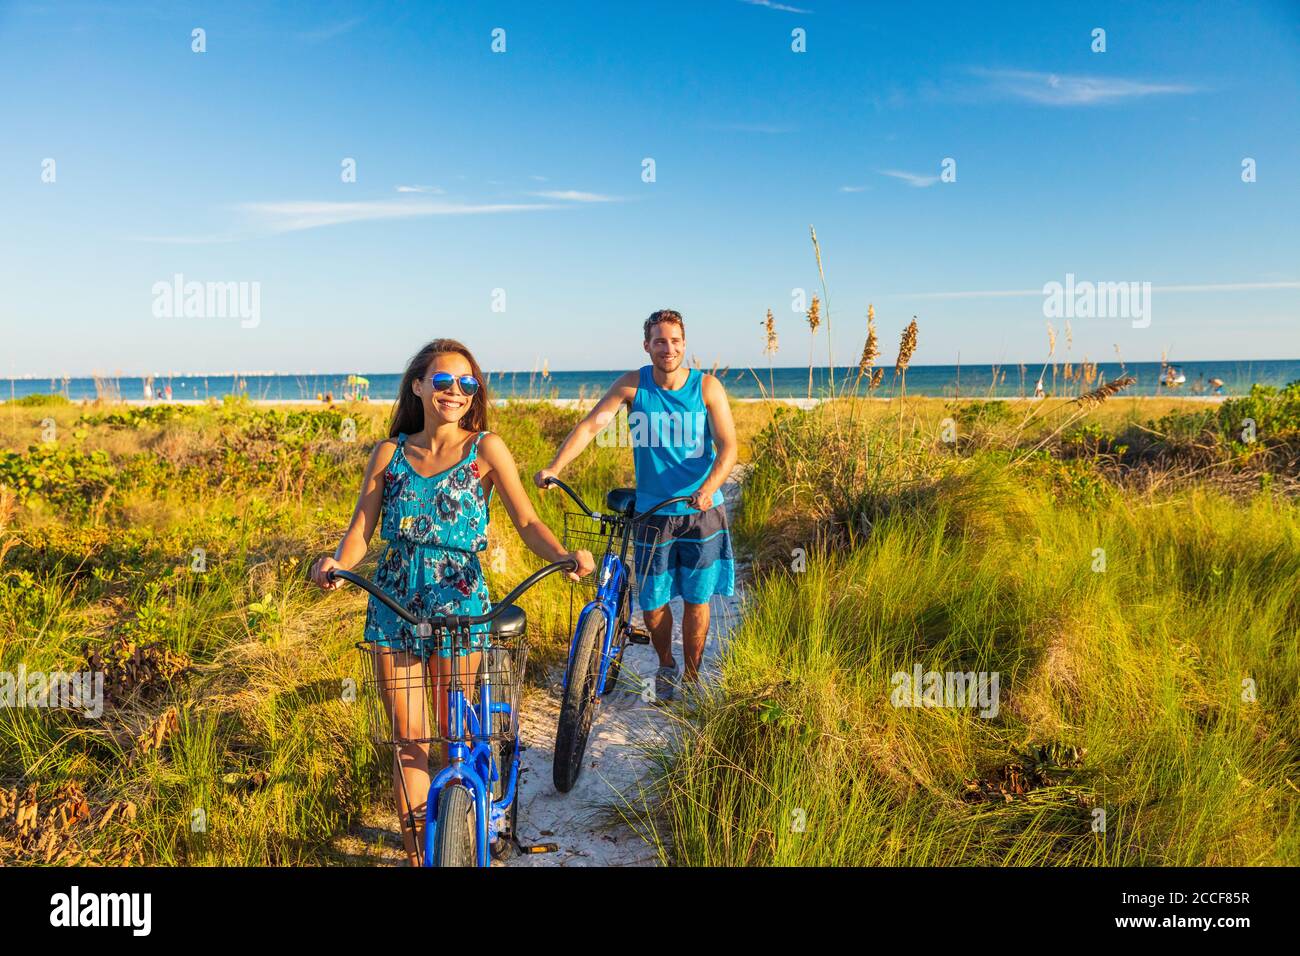 Summer people lifestyle happy couple biking on beach relaxing outdoors activity at sunset. Young woman and man riding recreational bikes bicycles on Stock Photo